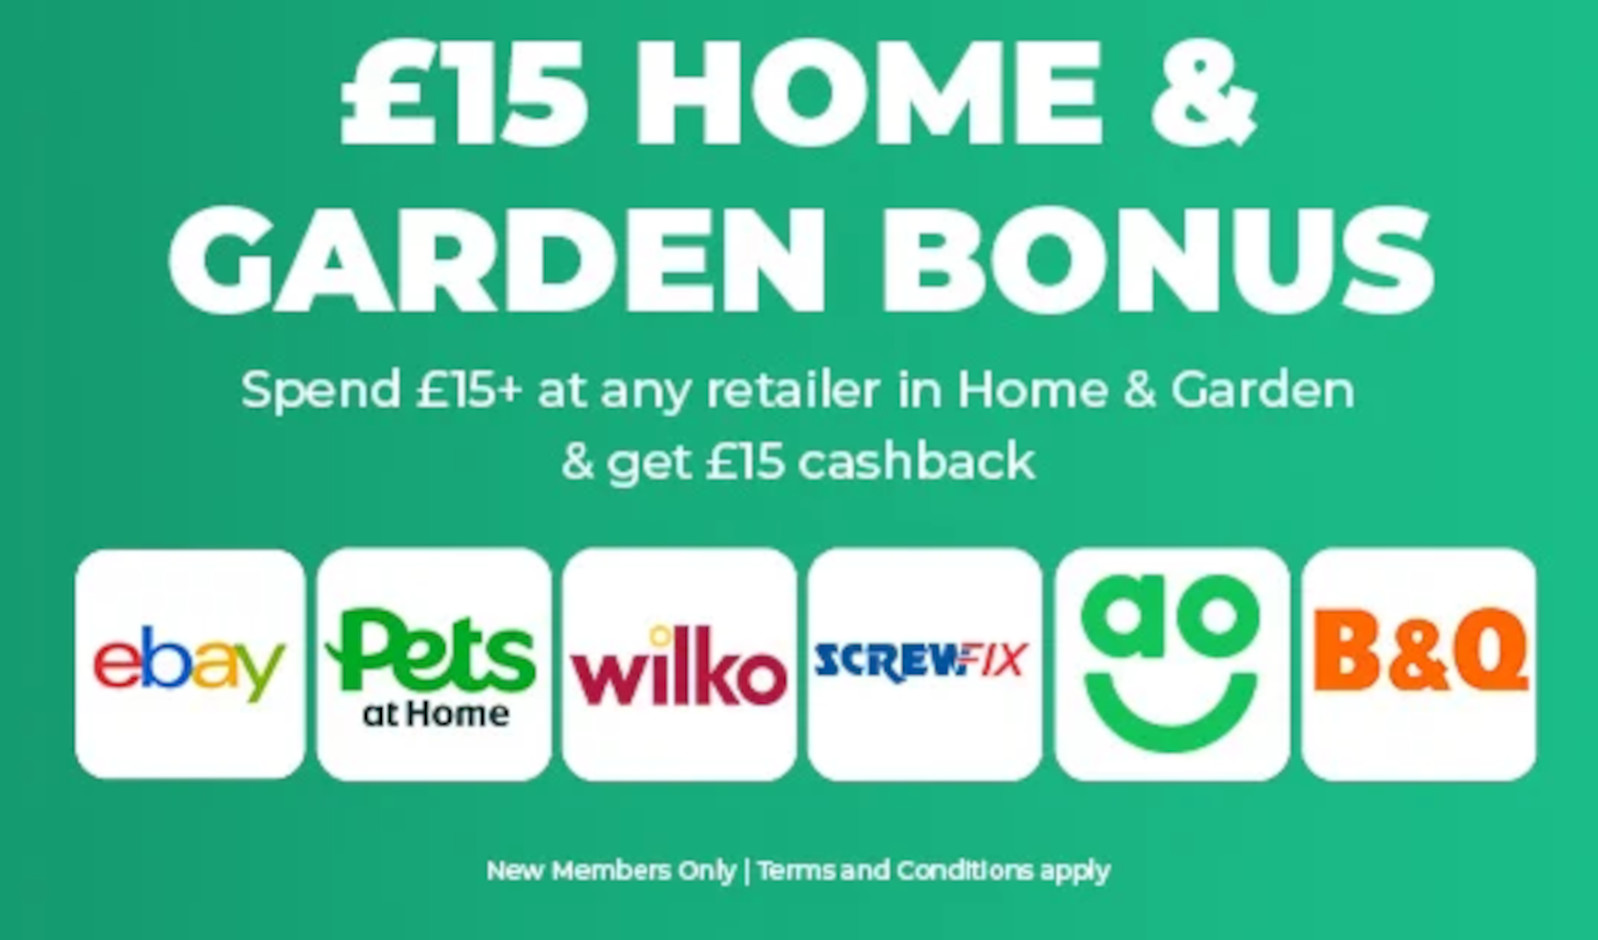 Spend £15+ at any retailer in Home & Garden & get £15 cashback